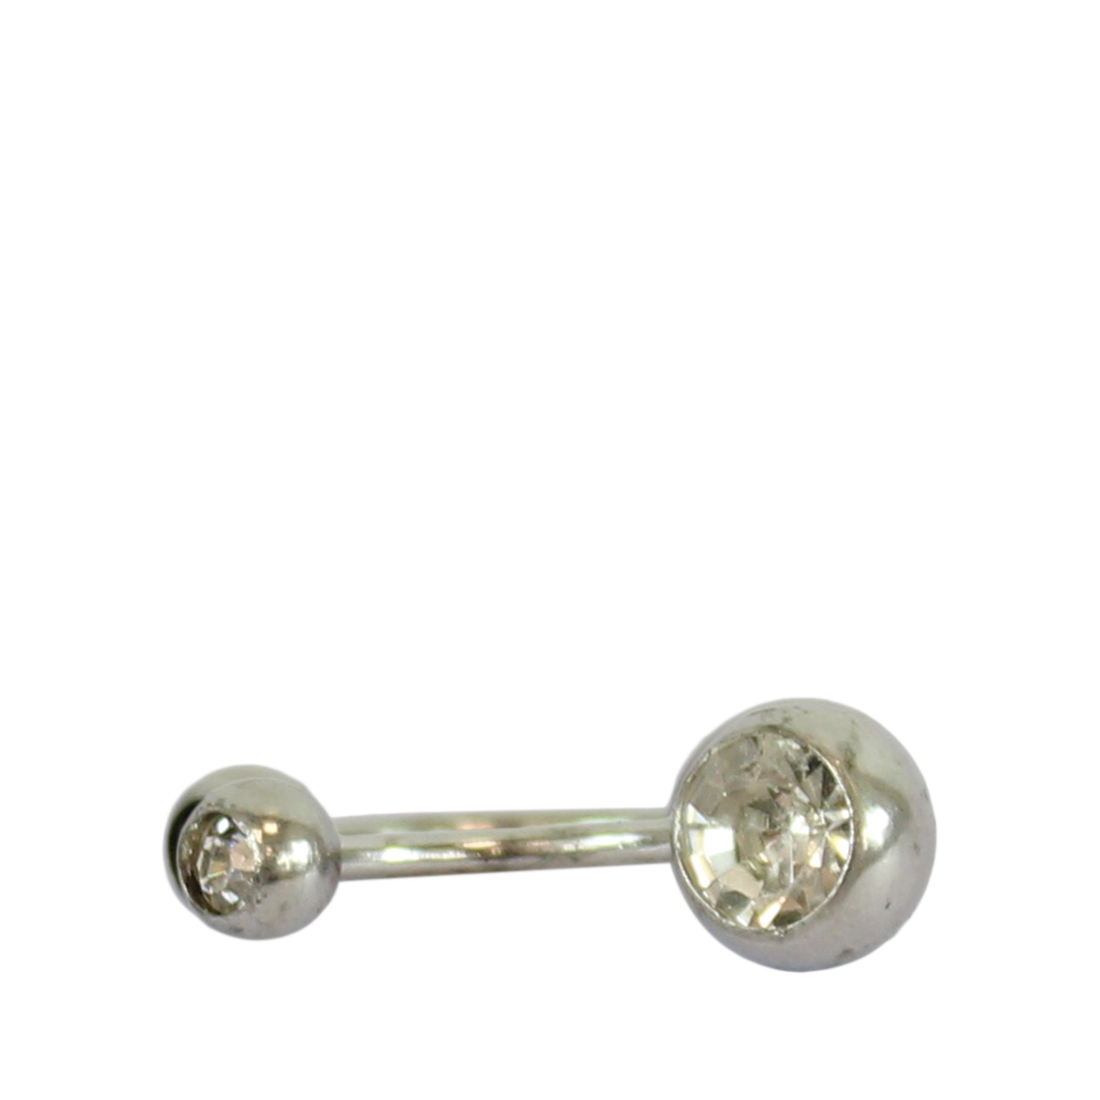 Belly button ring with diamond